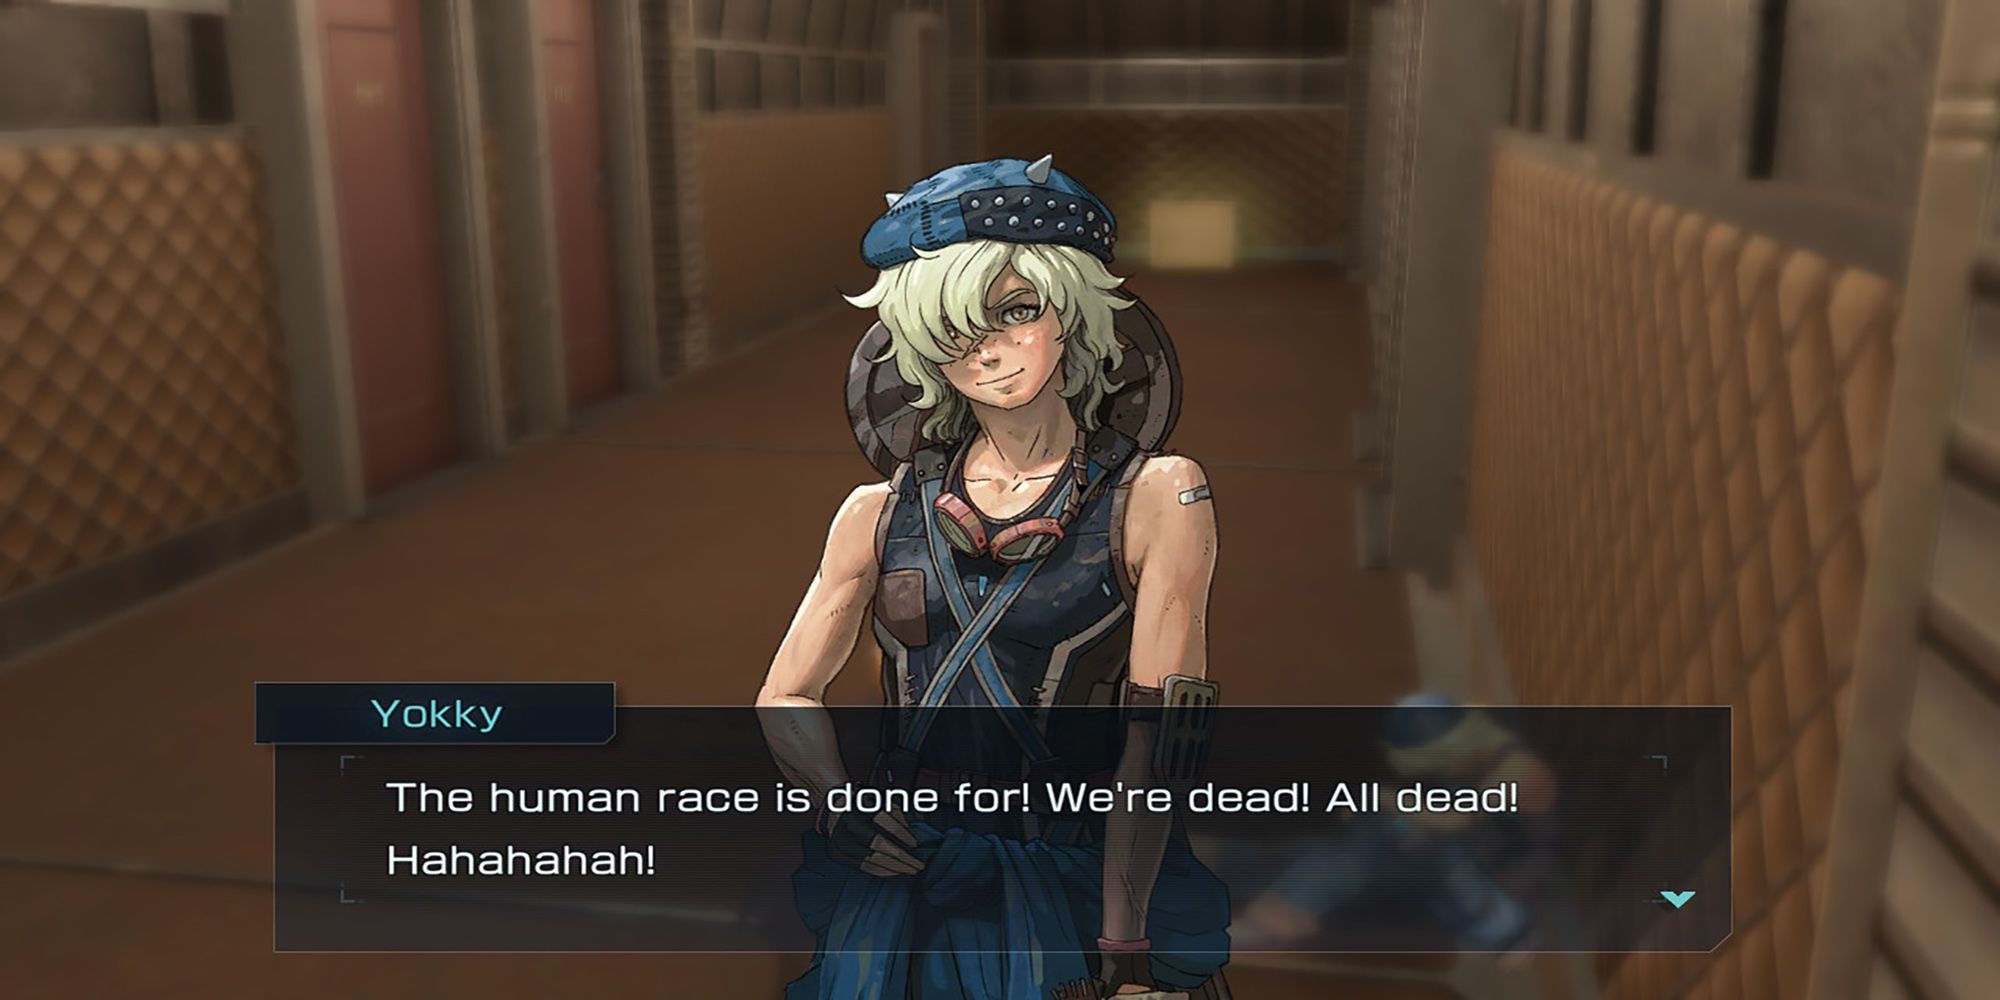 Yokky laments the end of the world during a conversation at Iron Base in Metal Max Xeno Reborn.